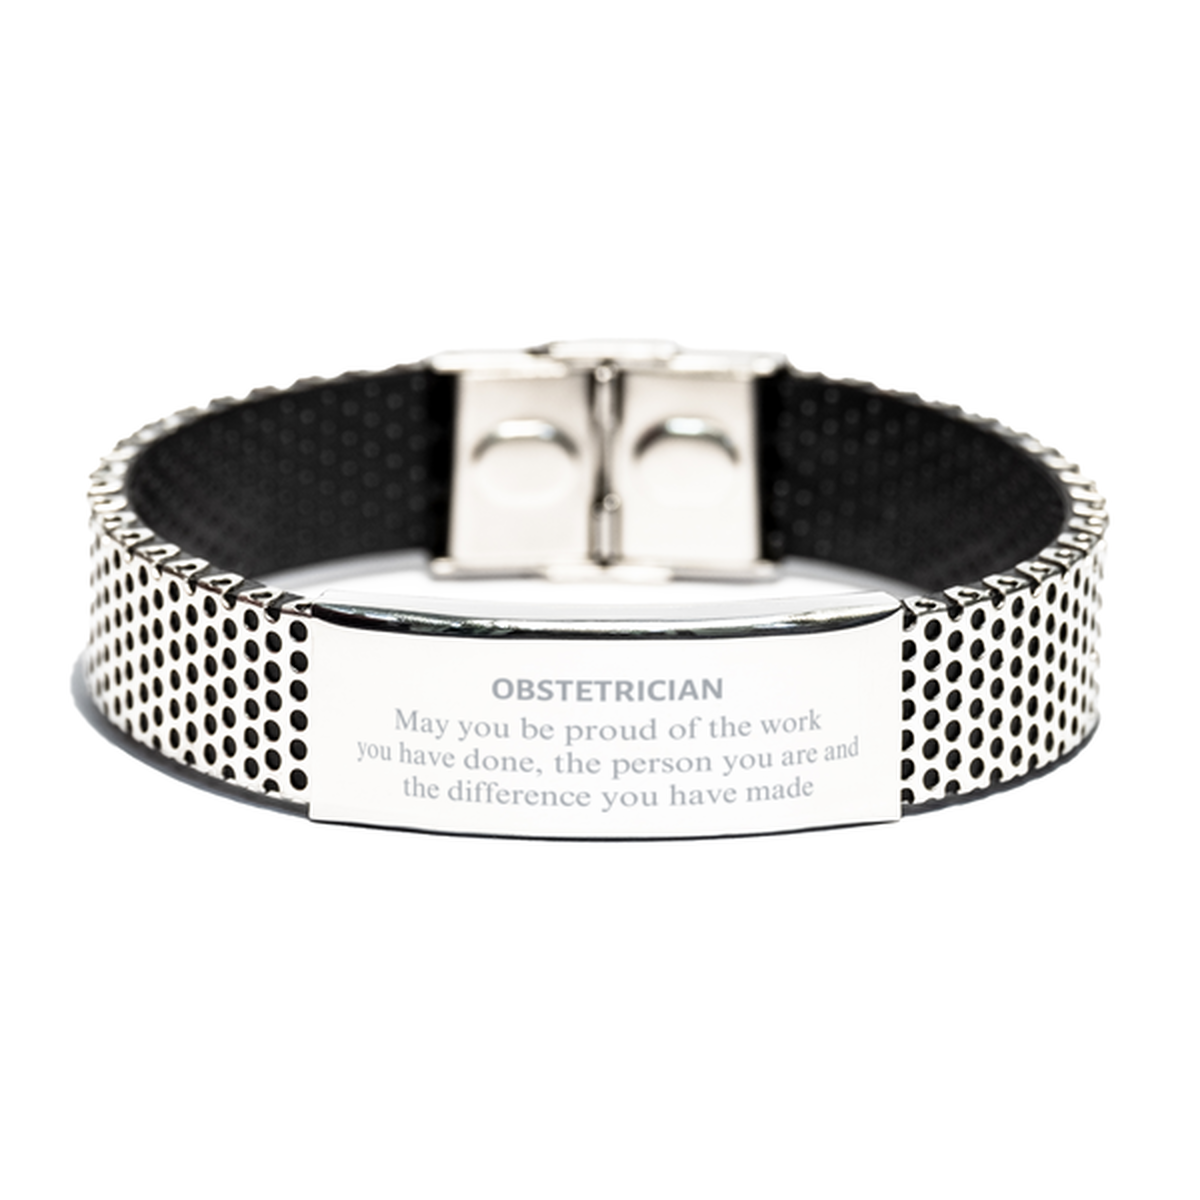 Obstetrician May you be proud of the work you have done, Retirement Obstetrician Stainless Steel Bracelet for Colleague Appreciation Gifts Amazing for Obstetrician